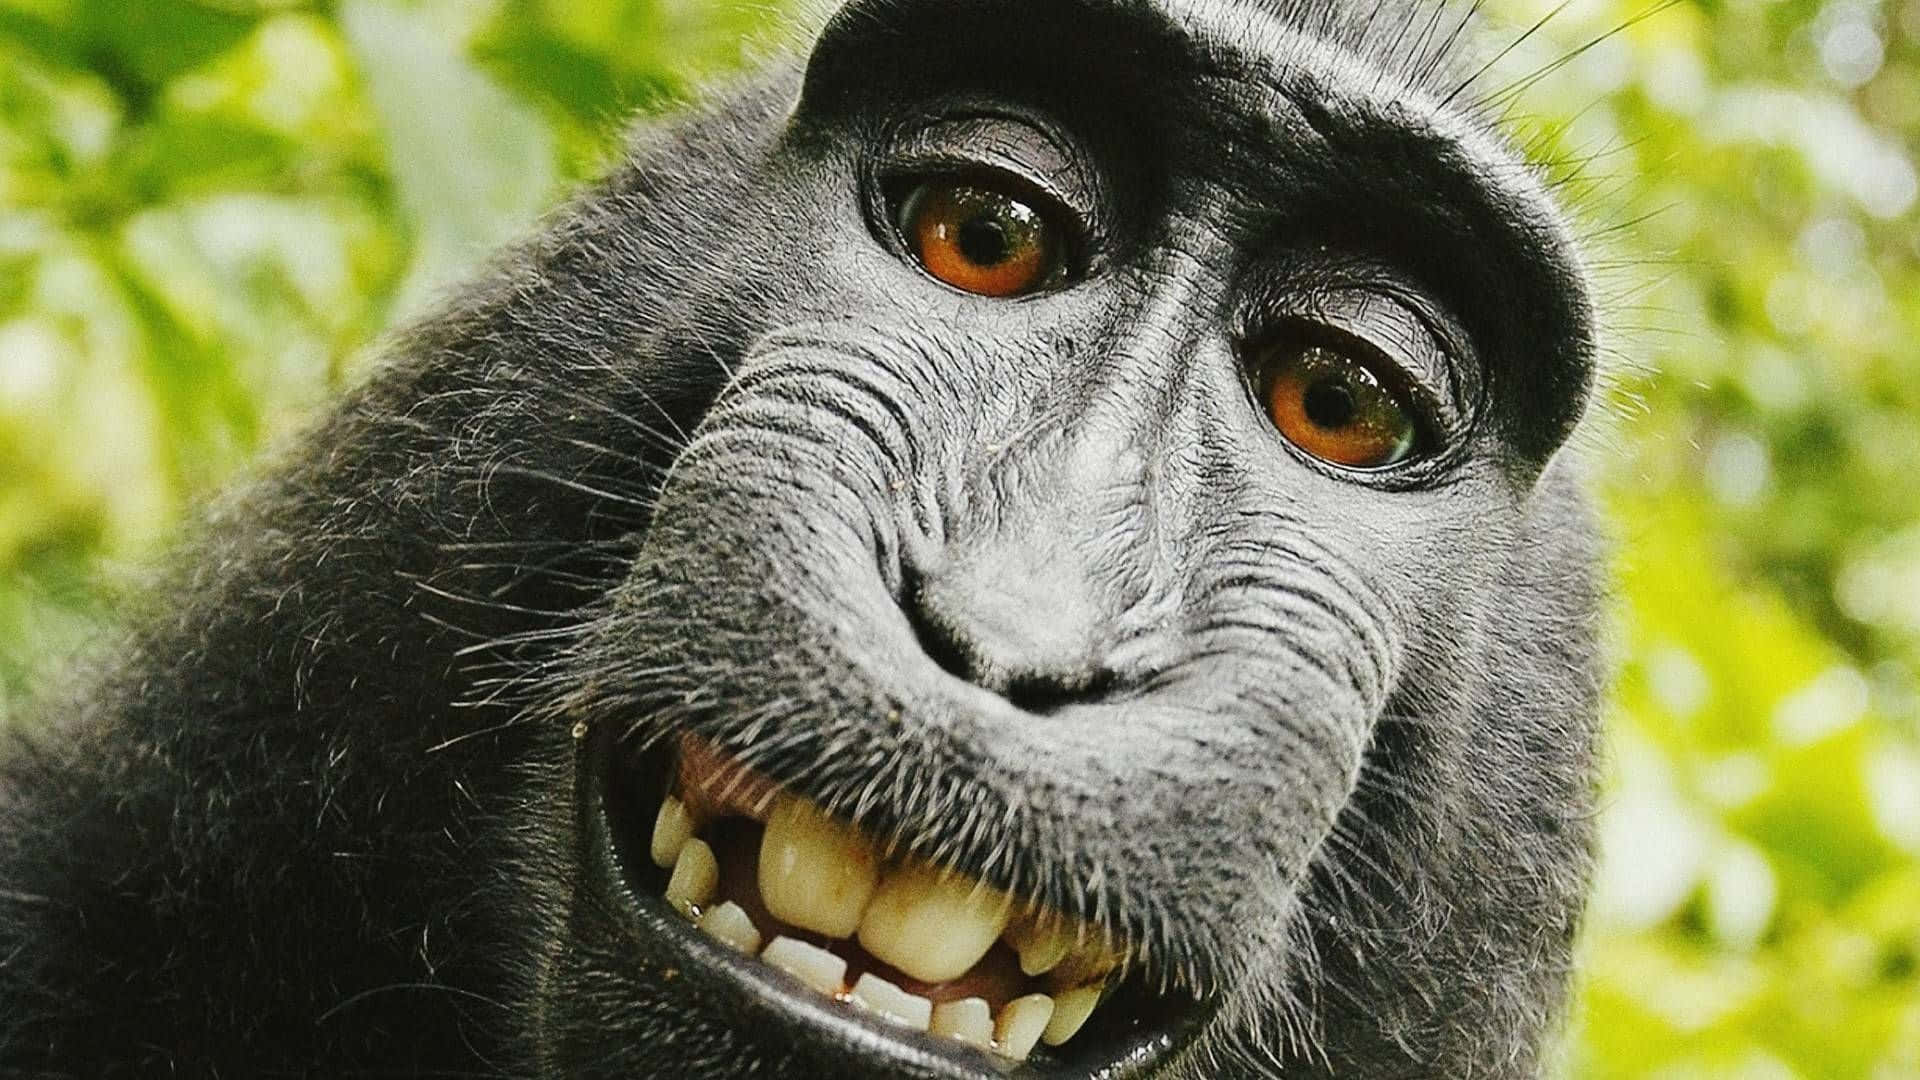 100+] Ugly Animals Pictures | Wallpapers.com